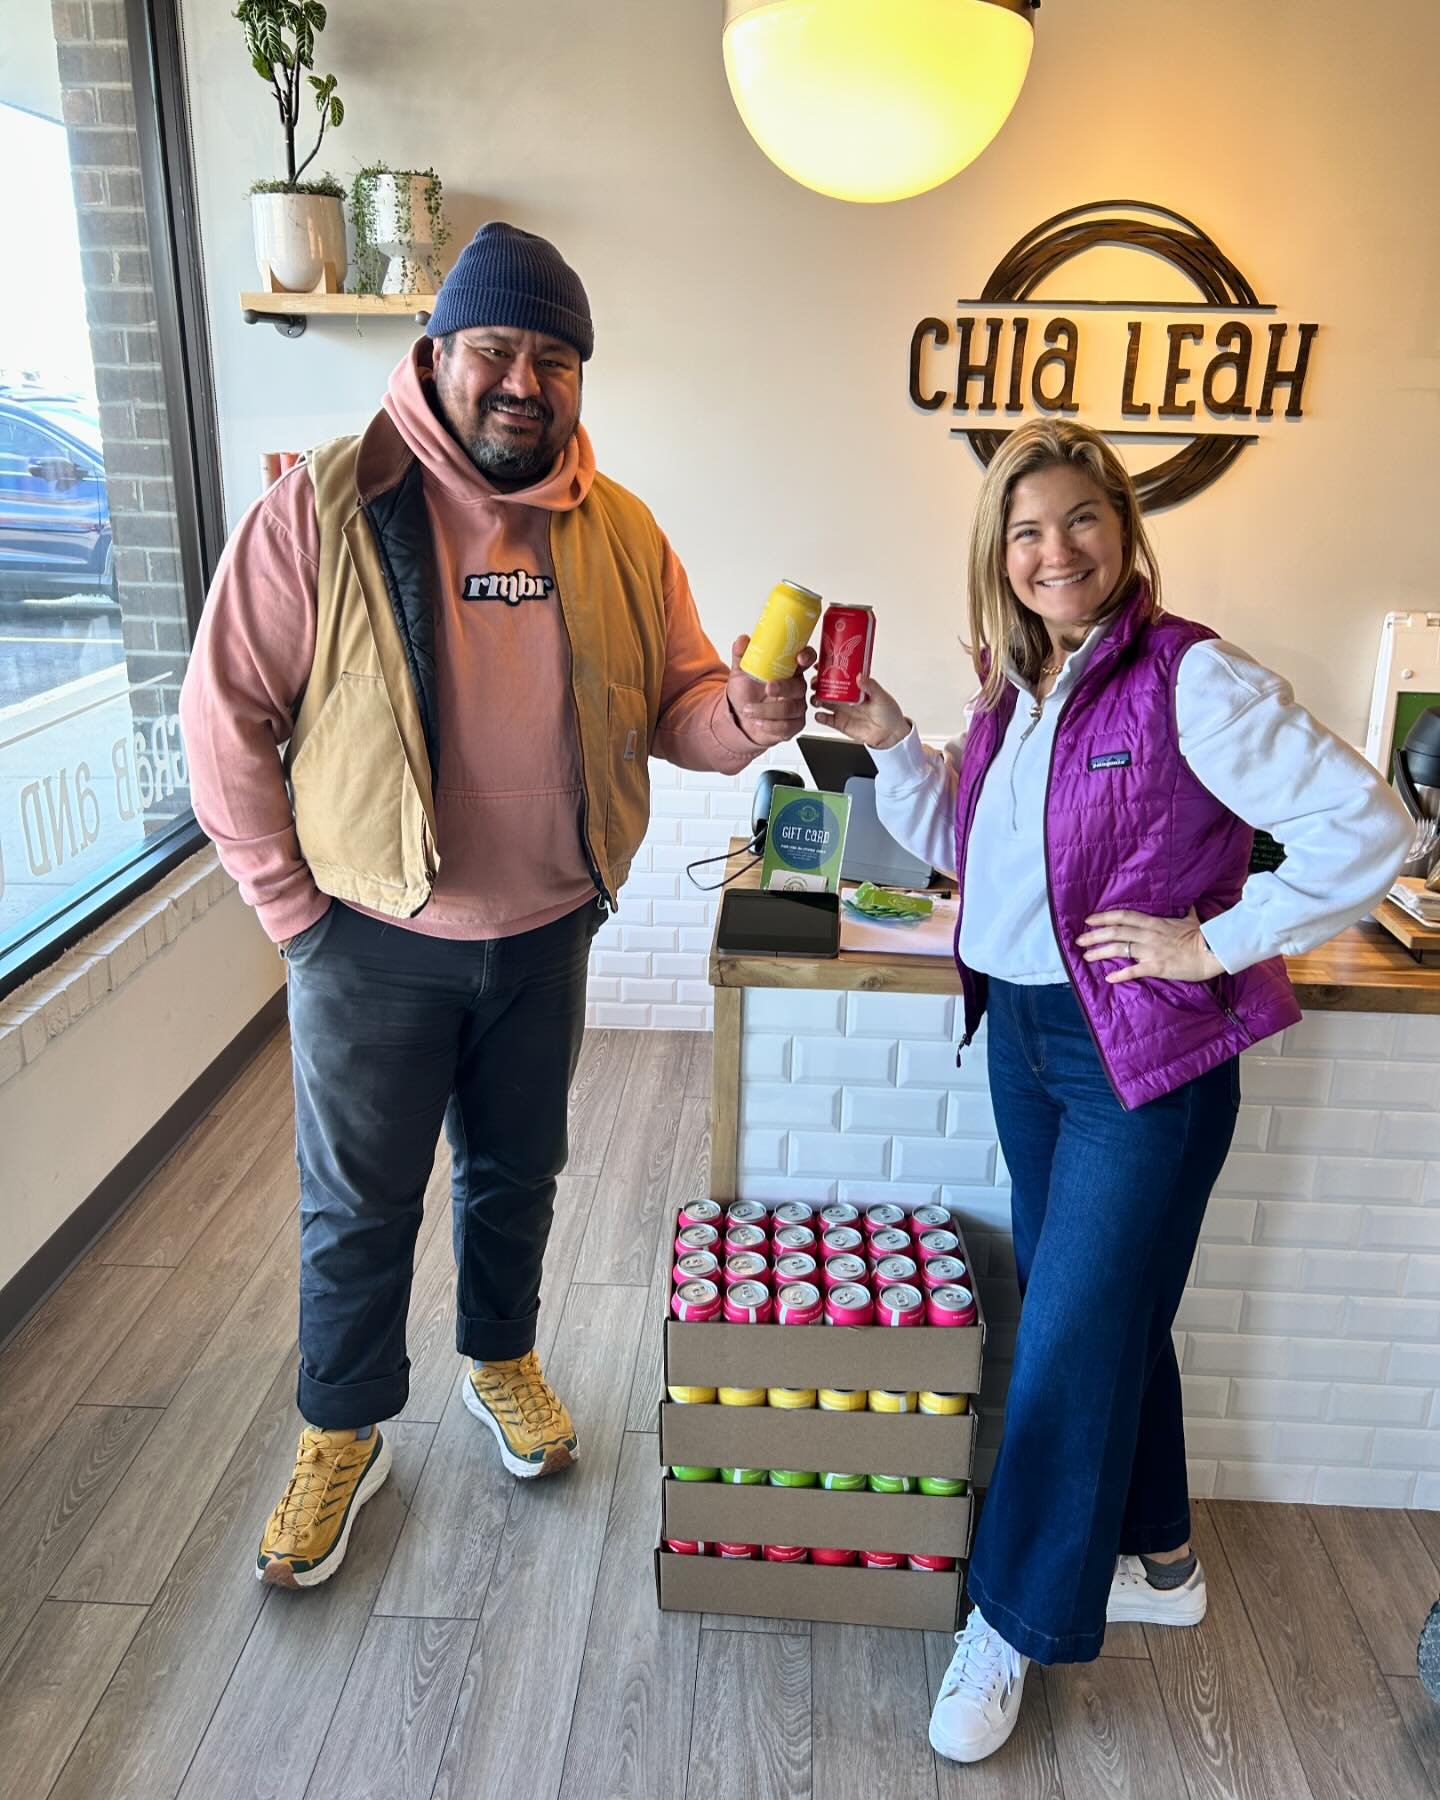 Restock of our new favorite kombucha, @drinkrmbr 
Our customers are craving the 💛Turmeric Tango and 🥀🍓Rose Petal Berry! 
We love supporting local biz and truly appreciate building relationships with the hardworking, innovative people behind the br